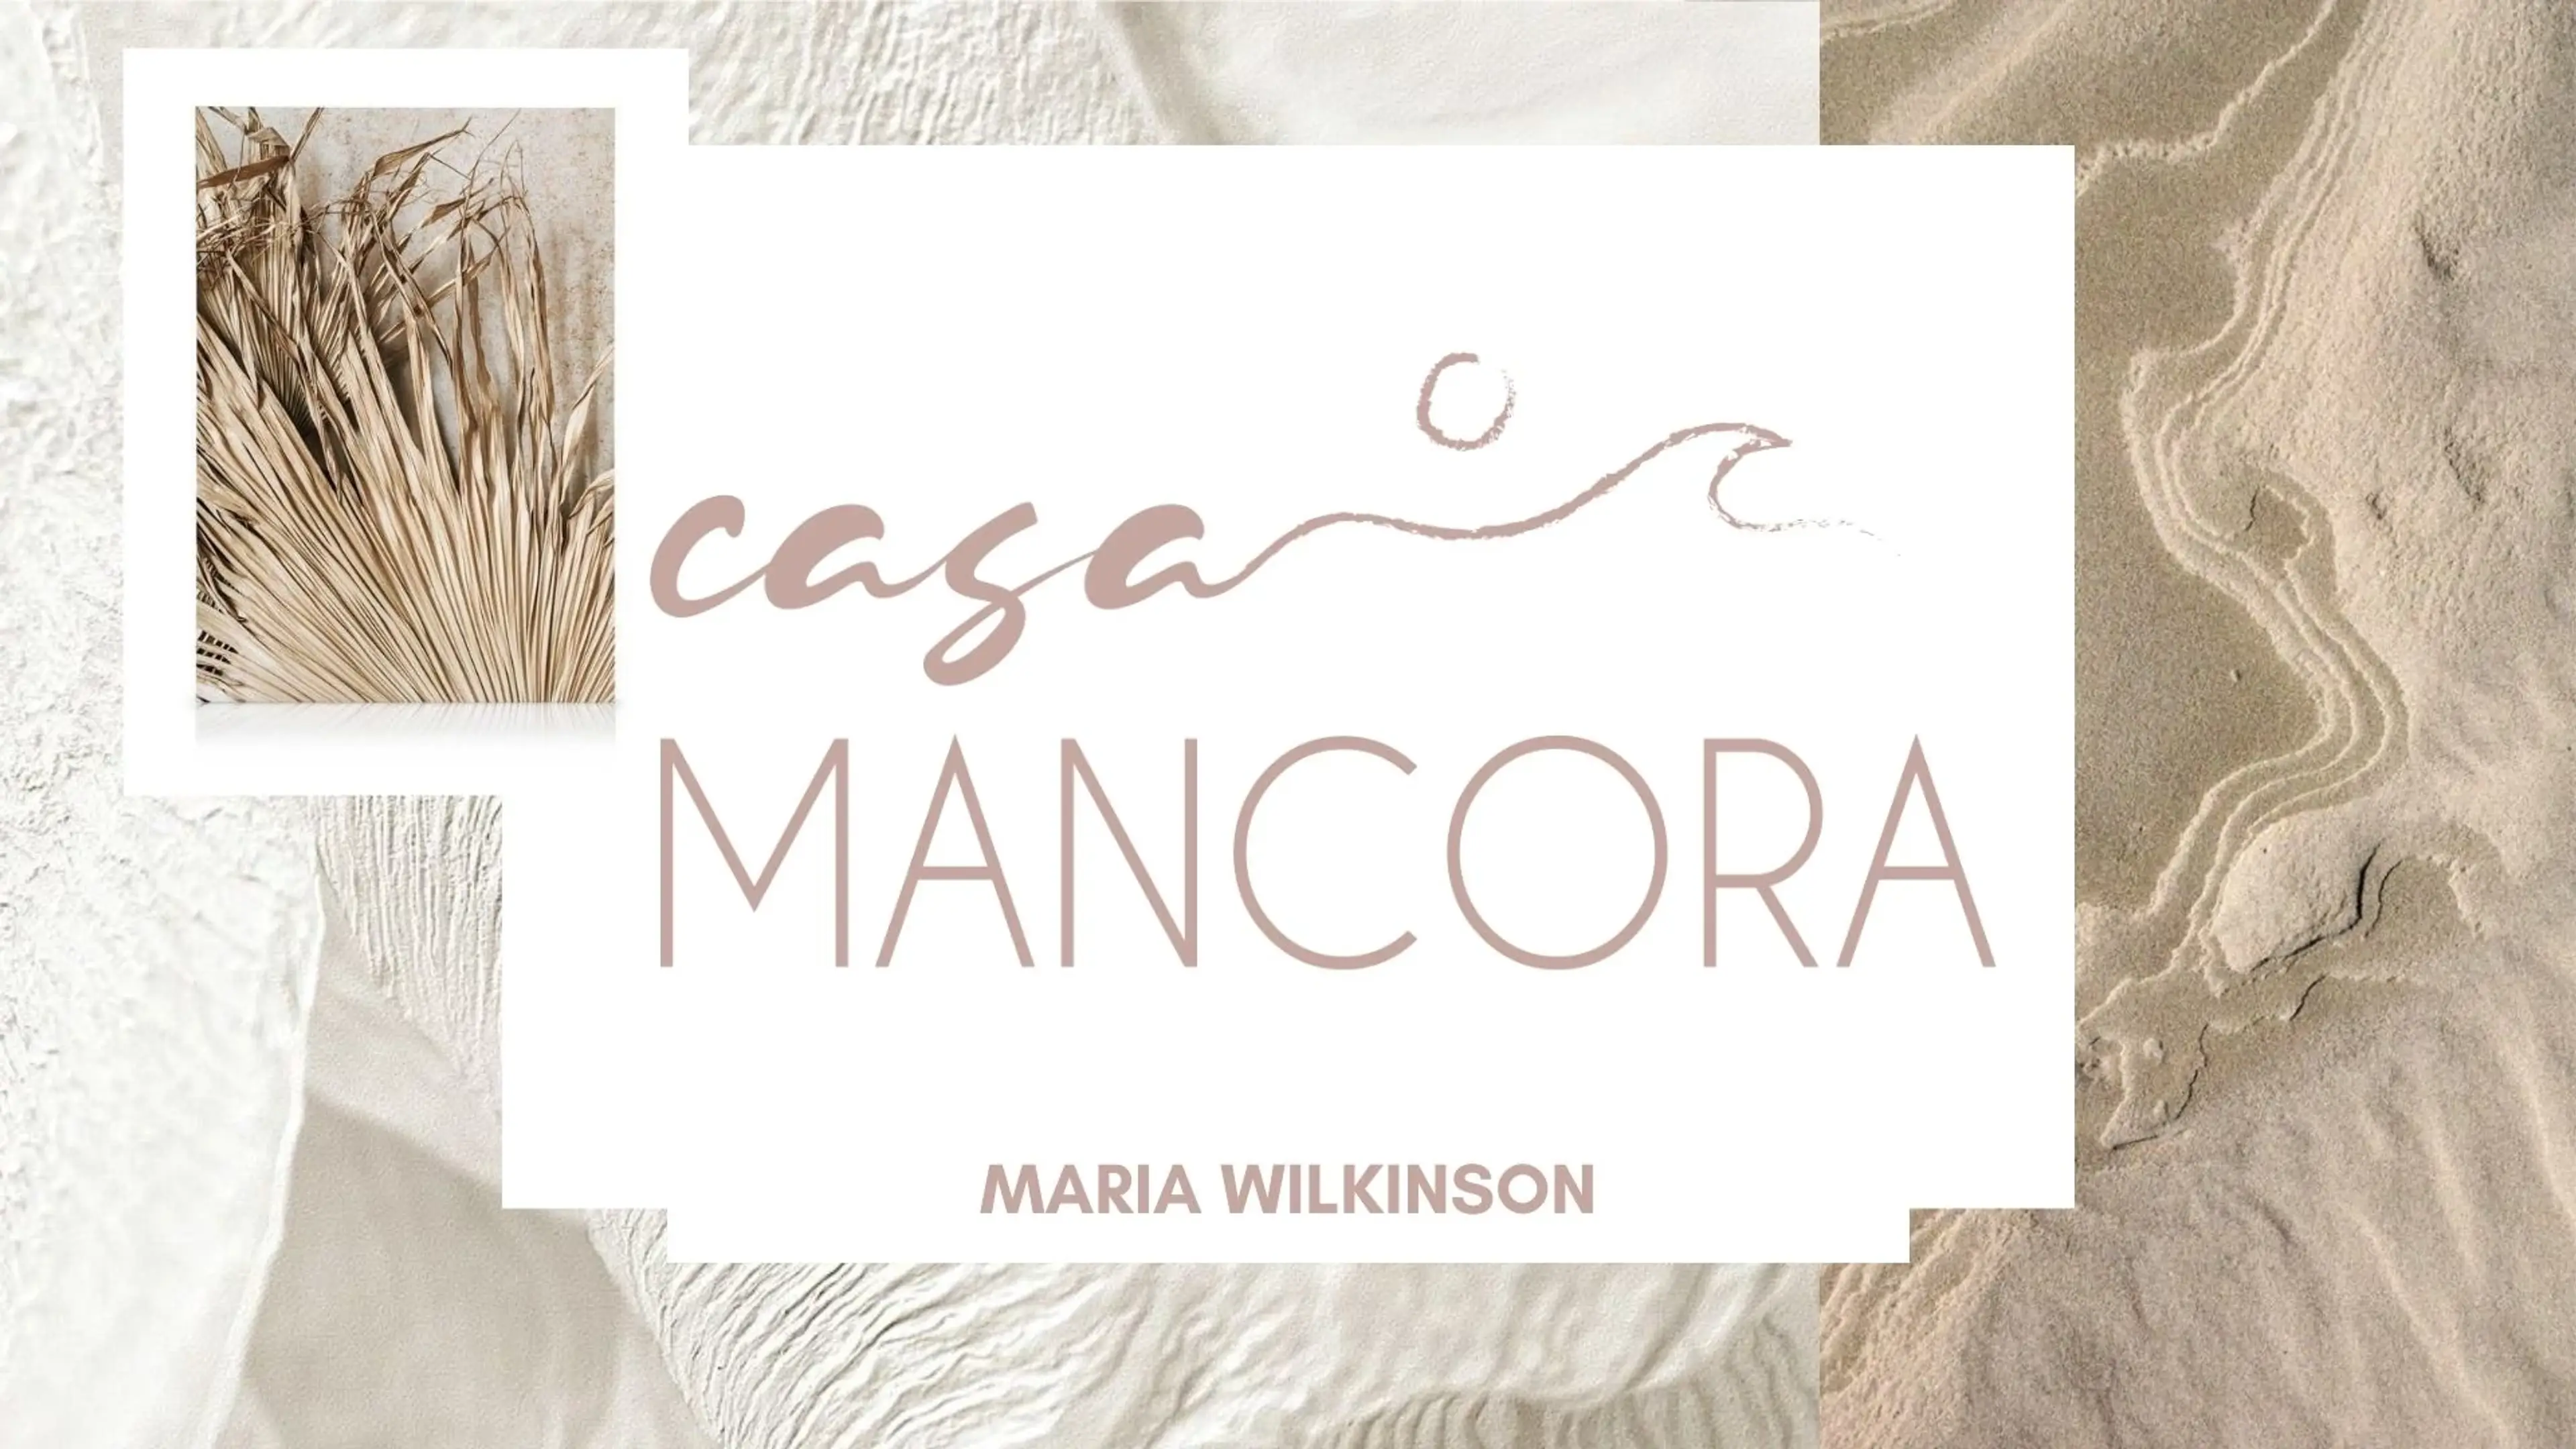 A Designer's Masterpiece: The Before and After Journey of Casa Mancora